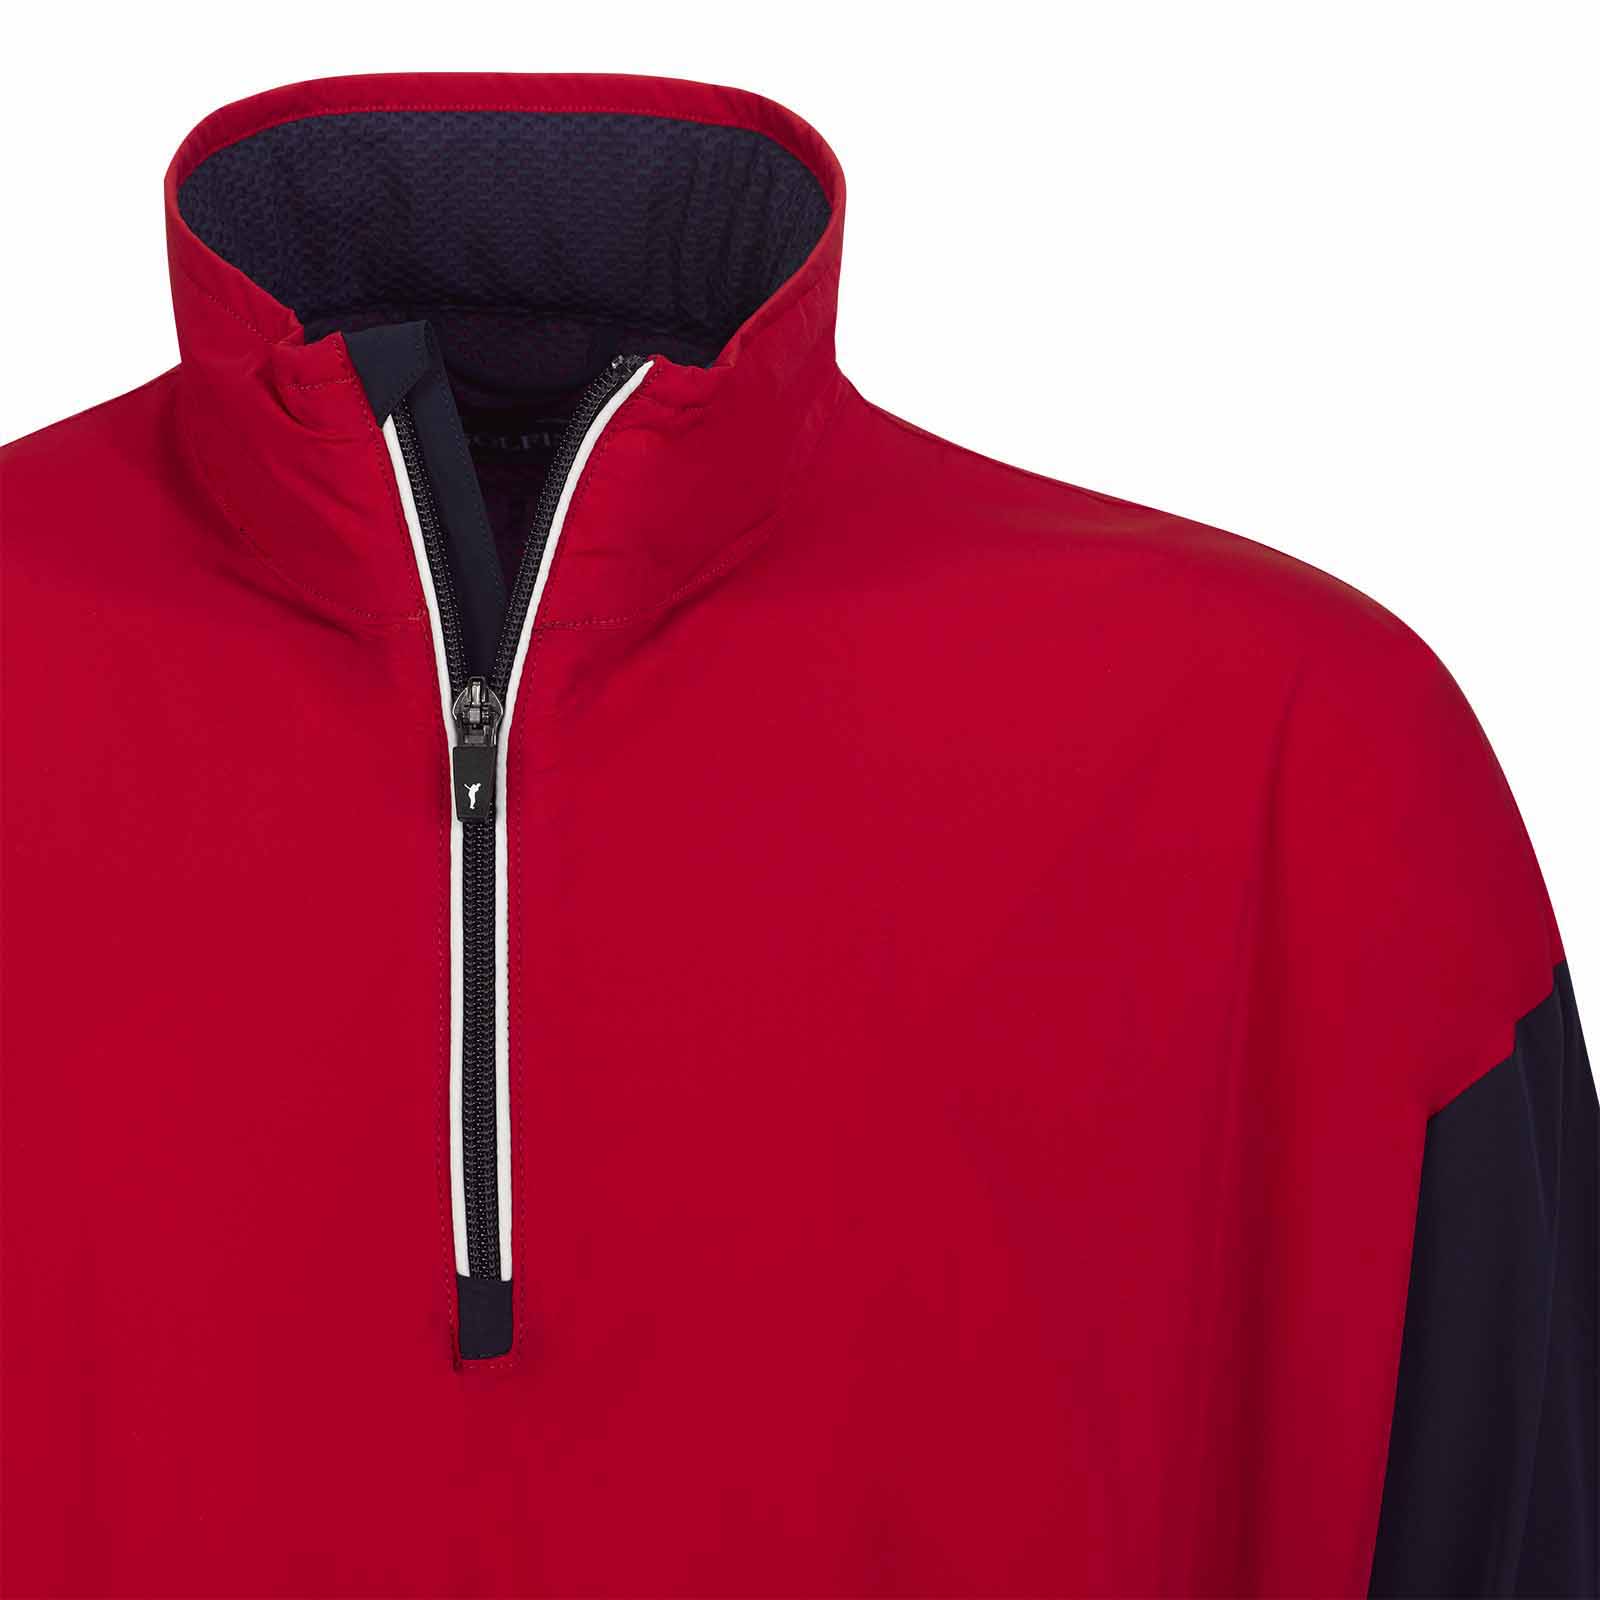 Men's windbreaker with wind protection, stand-up collar and short zip in loose fit